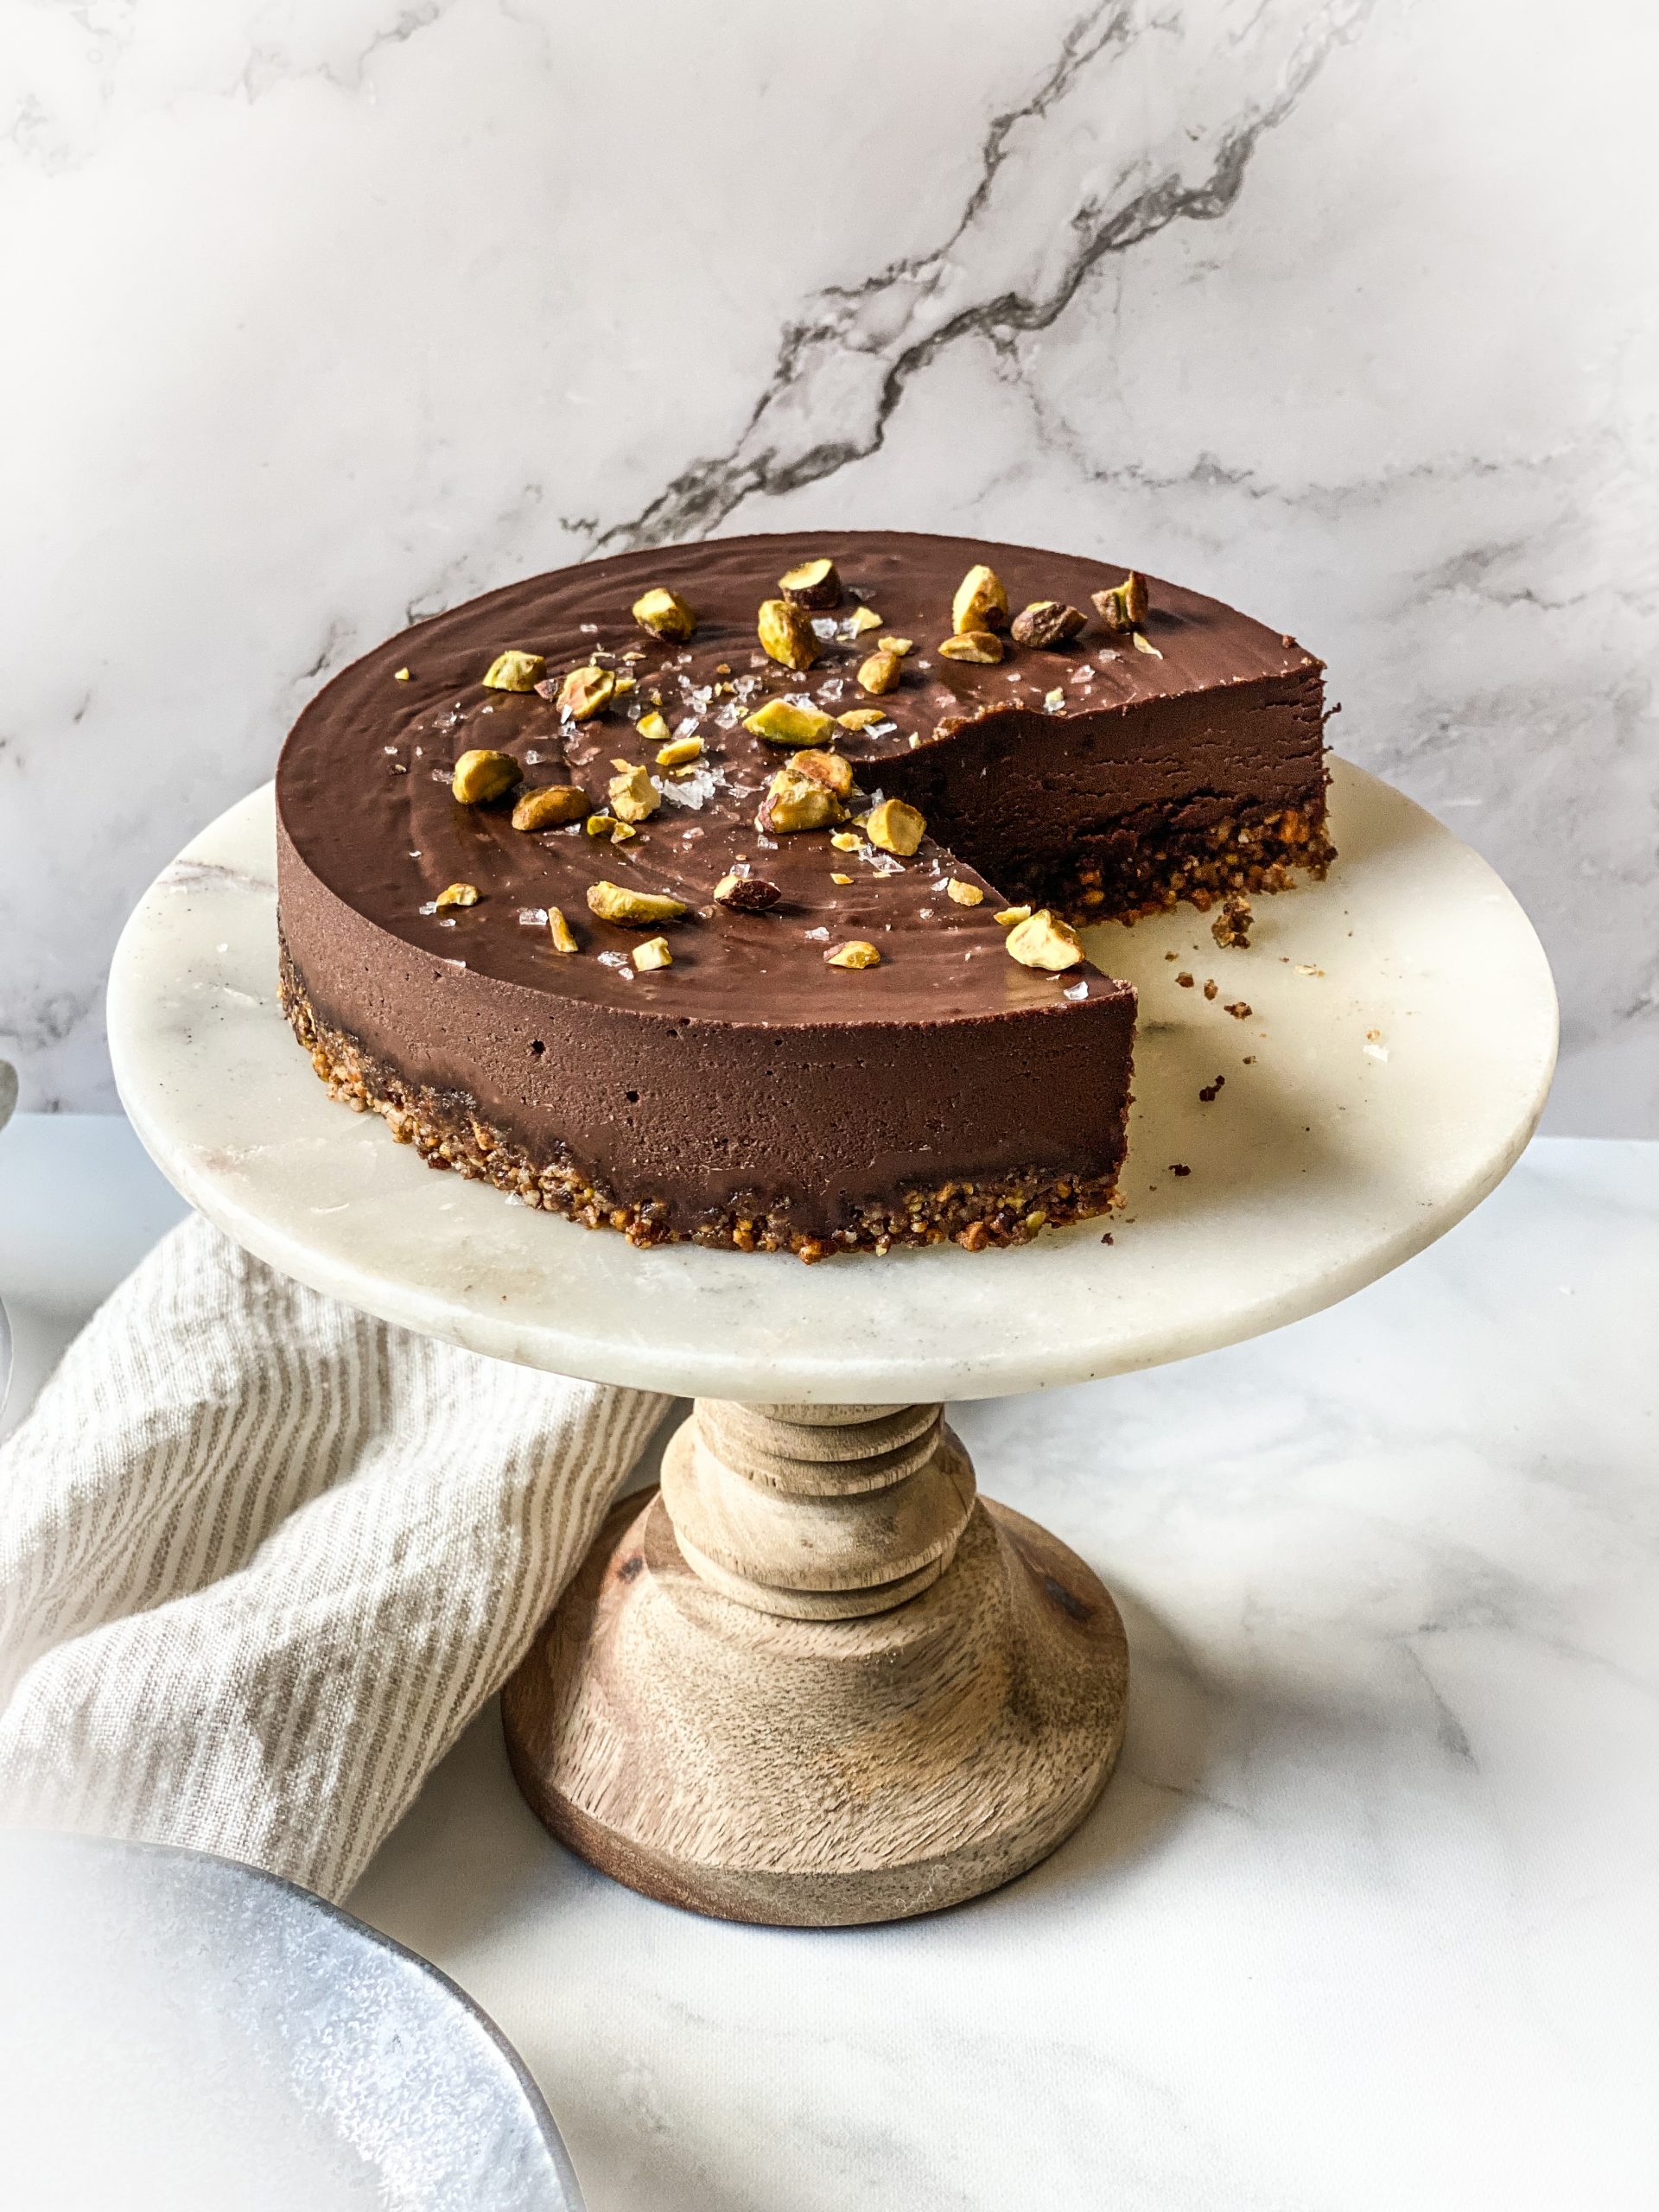 chocolate torte topped with pistachios and coarse sea salt